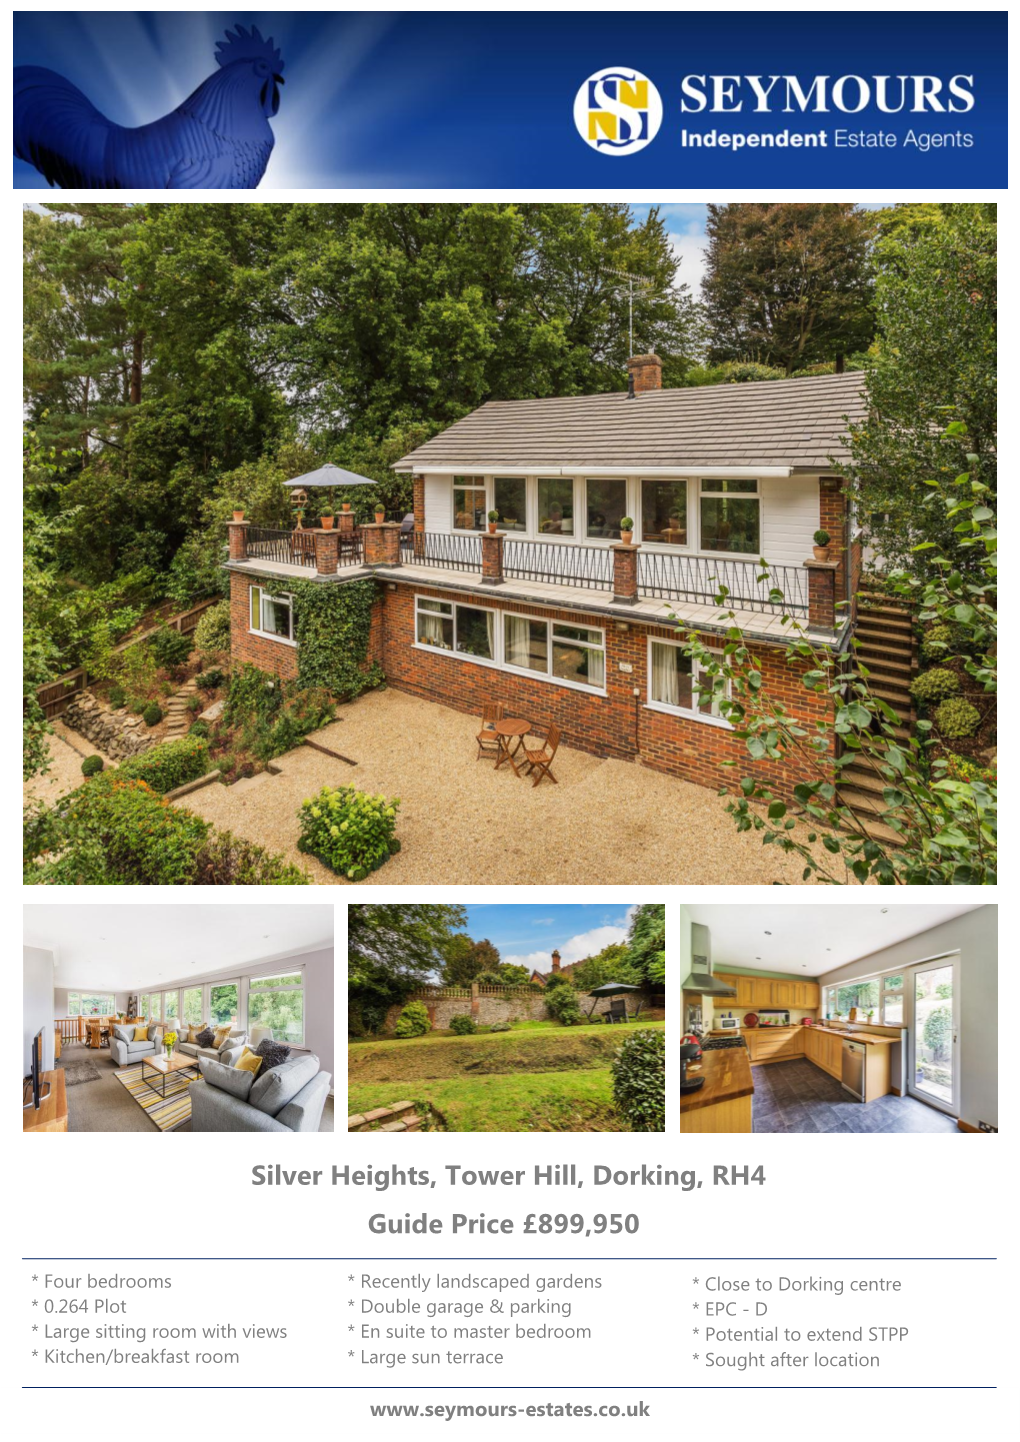 Silver Heights, Tower Hill, Dorking, RH4 Guide Price £899,950